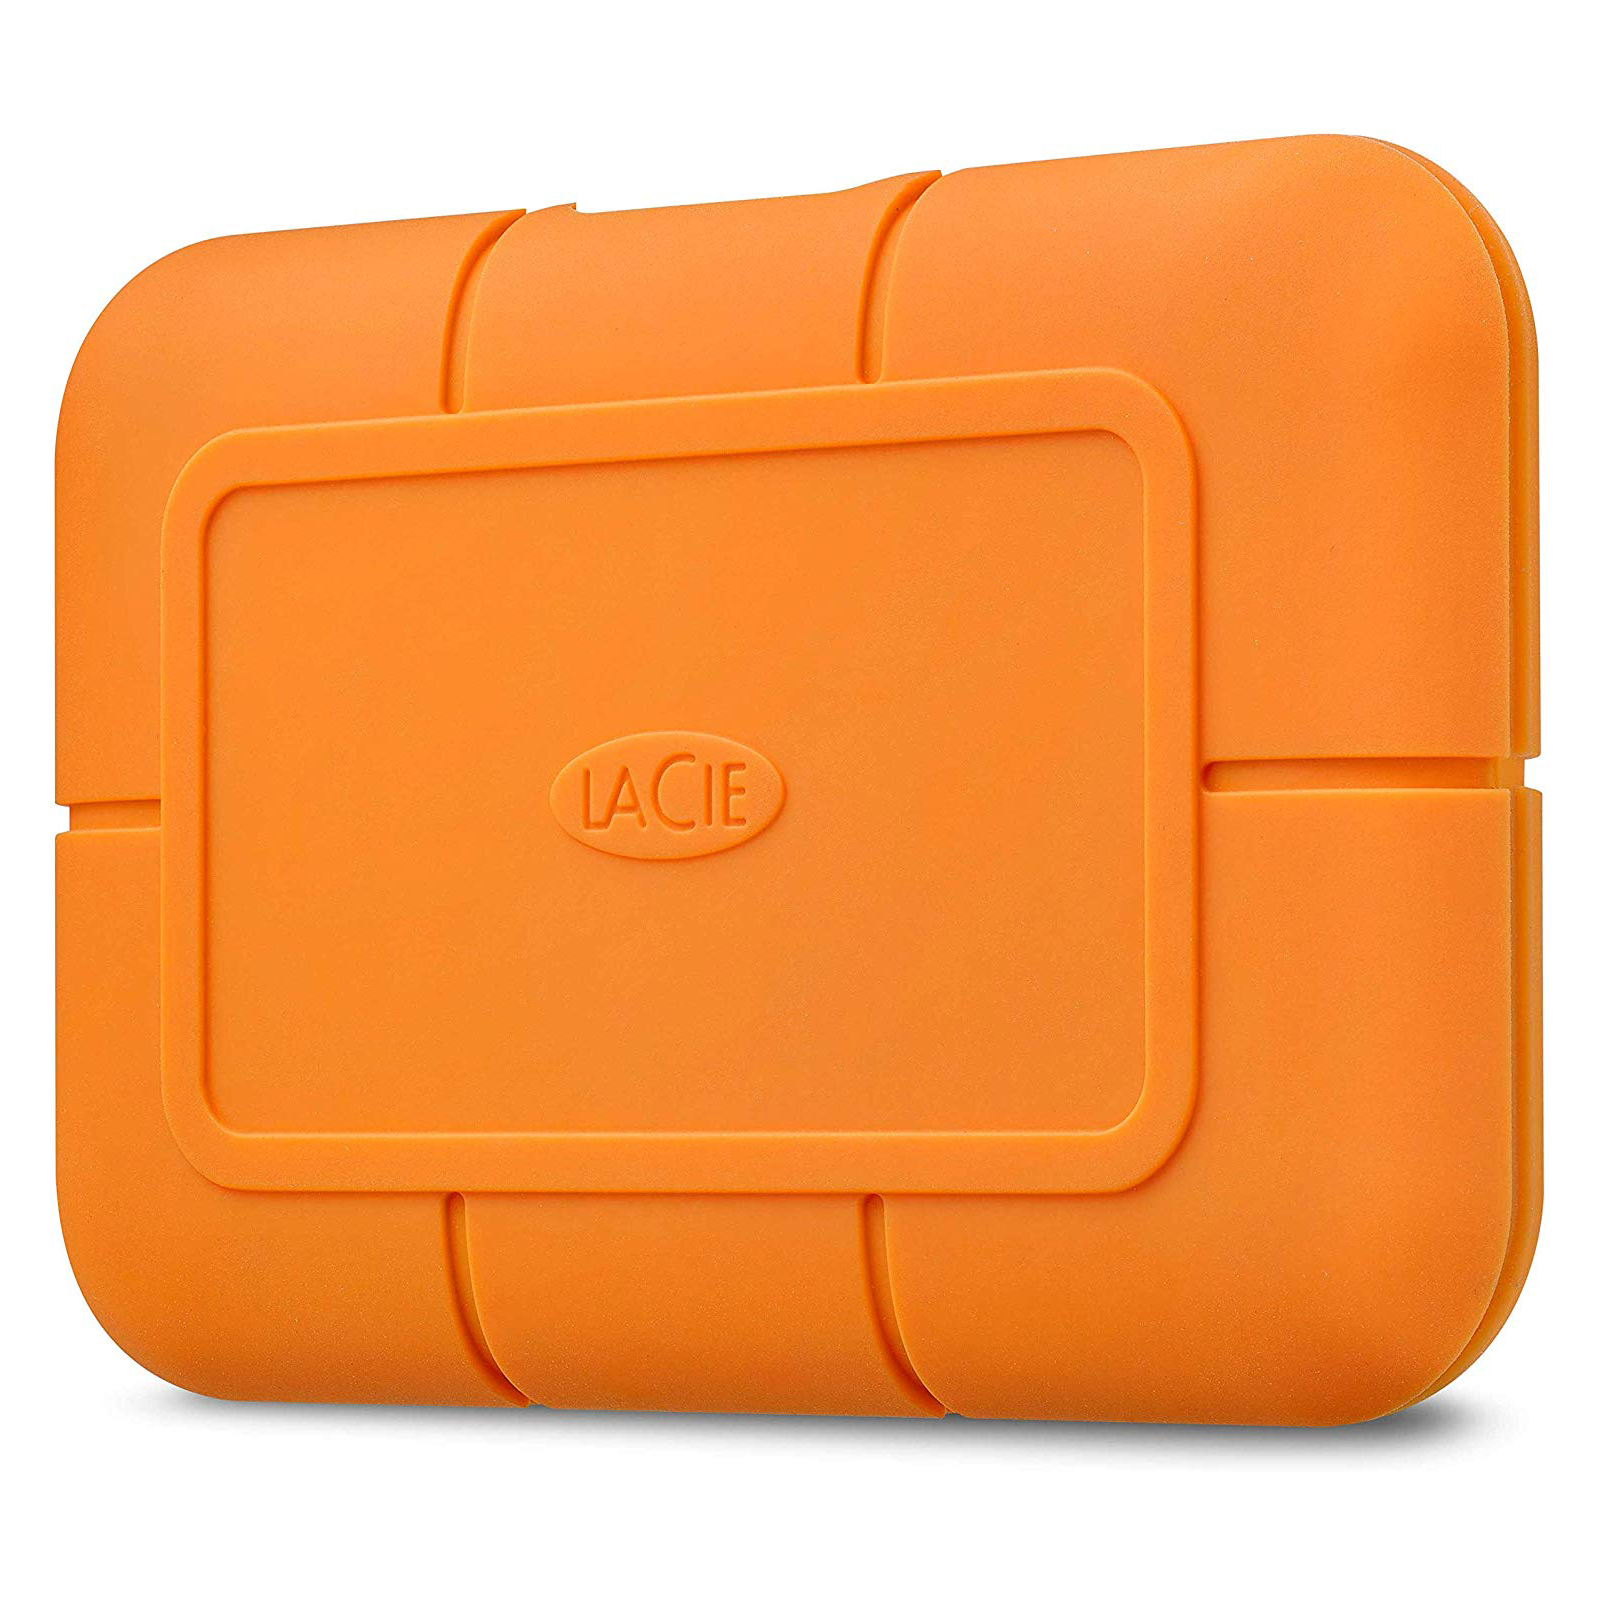 LaCie Rugged SSD & SSD Pro | Best Portable External Hard Drive for 2019